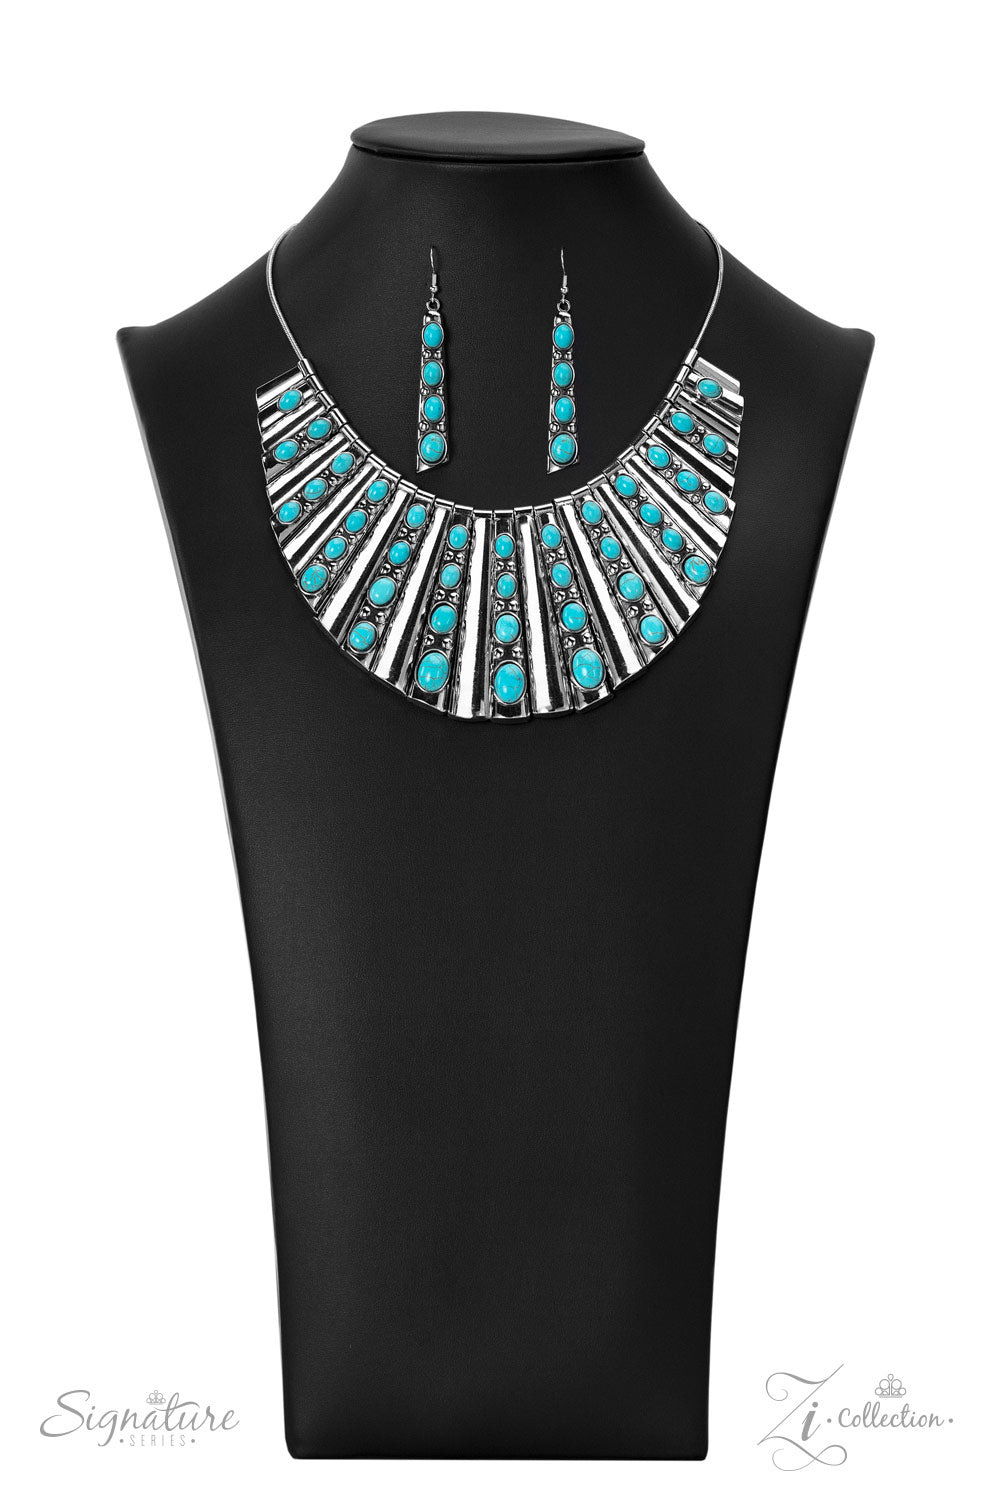 Bib Western Necklace with Turquoise Stone and Silver - The Ebony